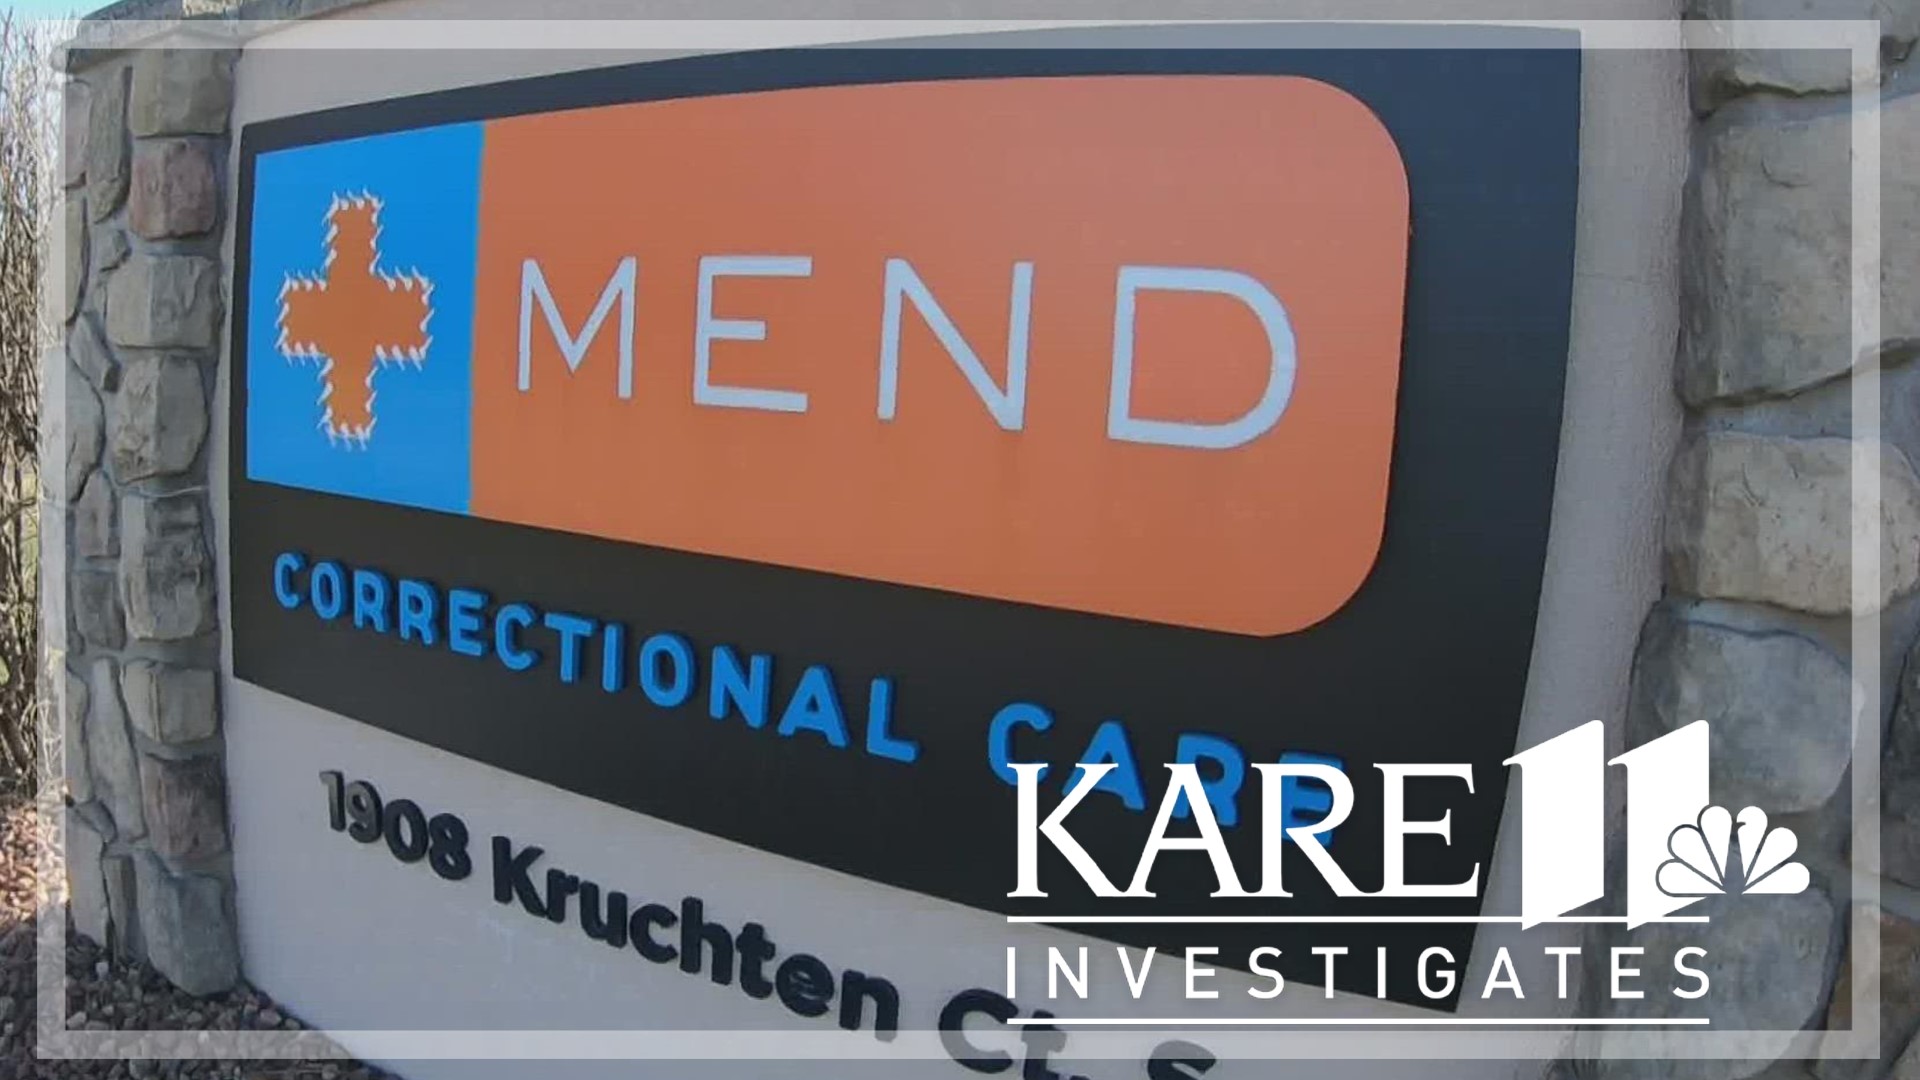 Citing litigation risks along with legal and ethical issues, some Minnesota counties cut ties with the jail medical company at the center of a KARE 11 investigation.